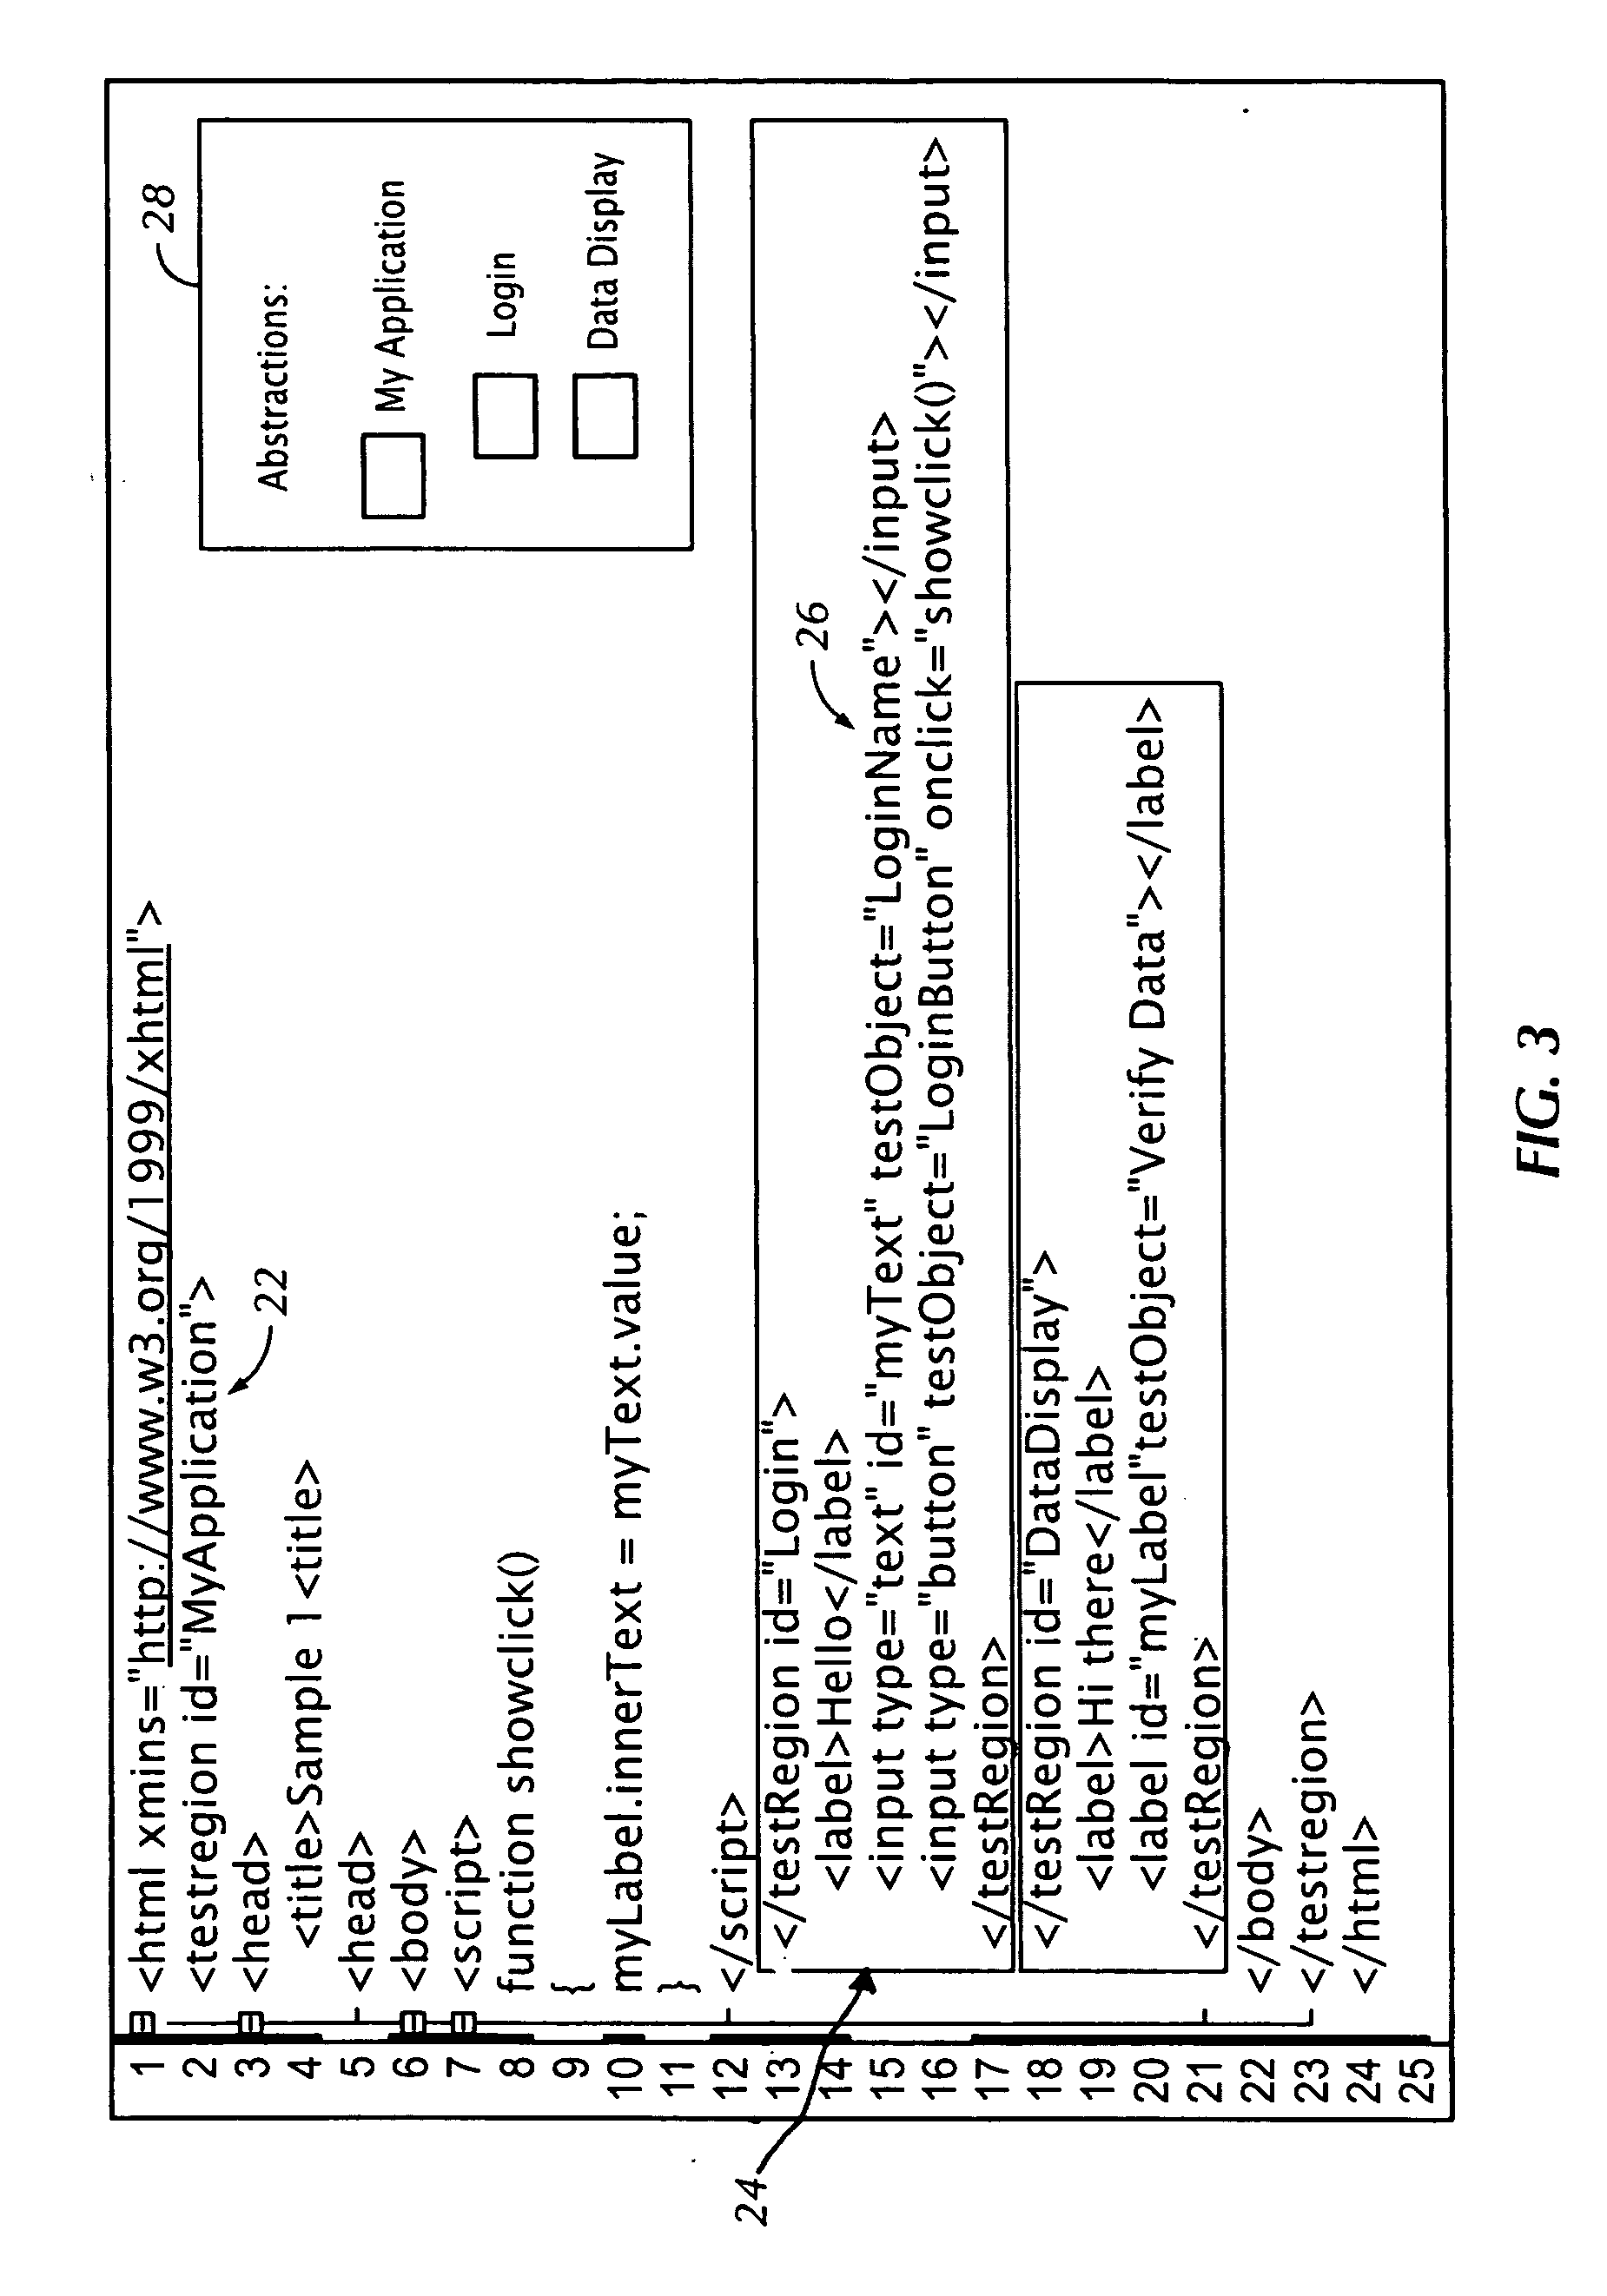 System, method, and computer readable medium for universal software testing